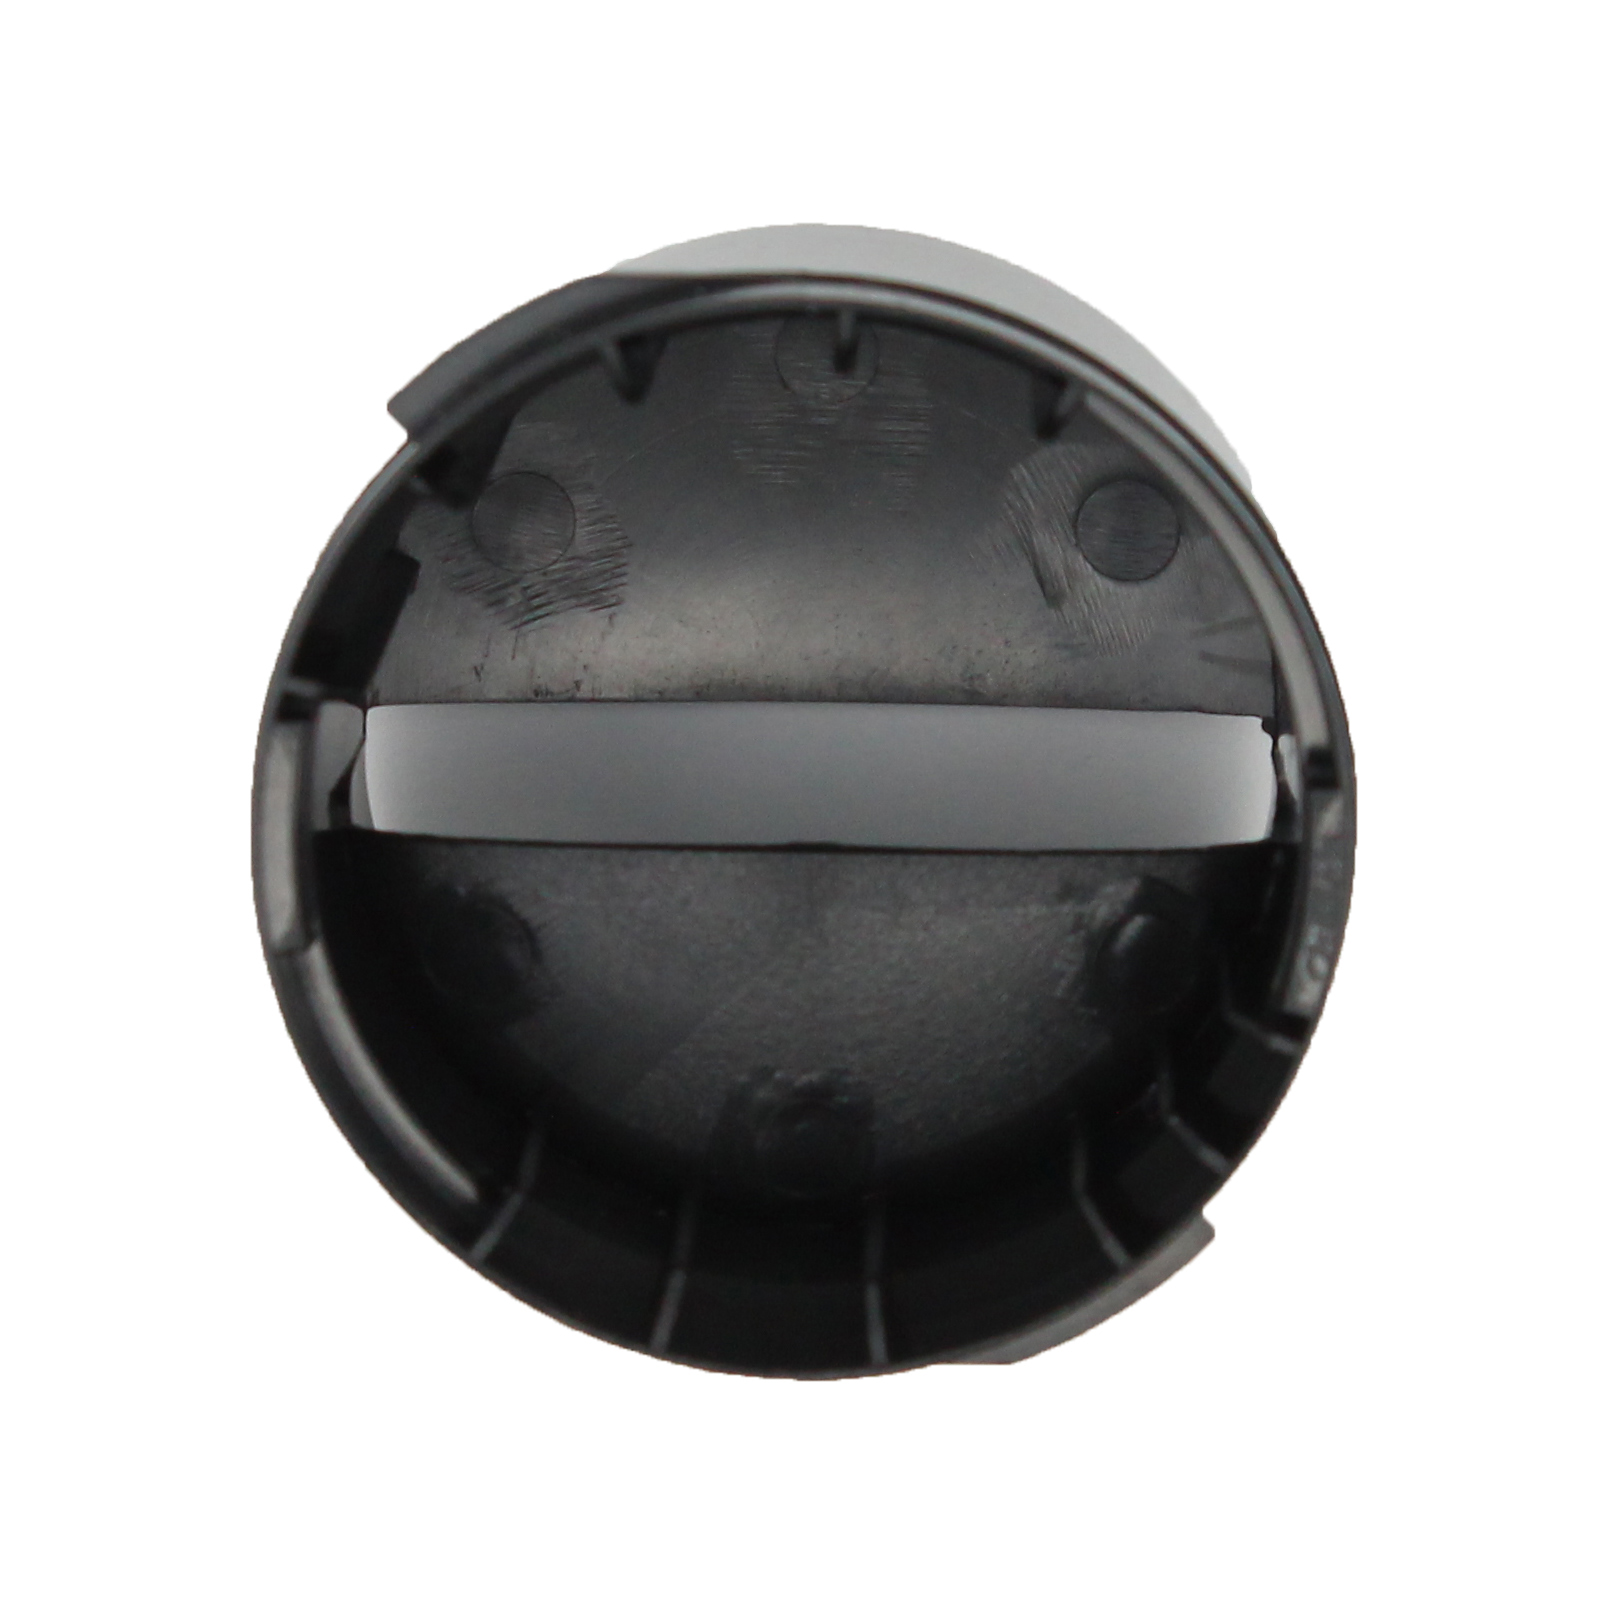 2260502B Refrigerator Water Filter Cap Replacement for Kenmore / Sears 10656992602 Refrigerator - Compatible with WP2260518B Black Water Filter Cap - UpStart Components Brand - image 2 of 4